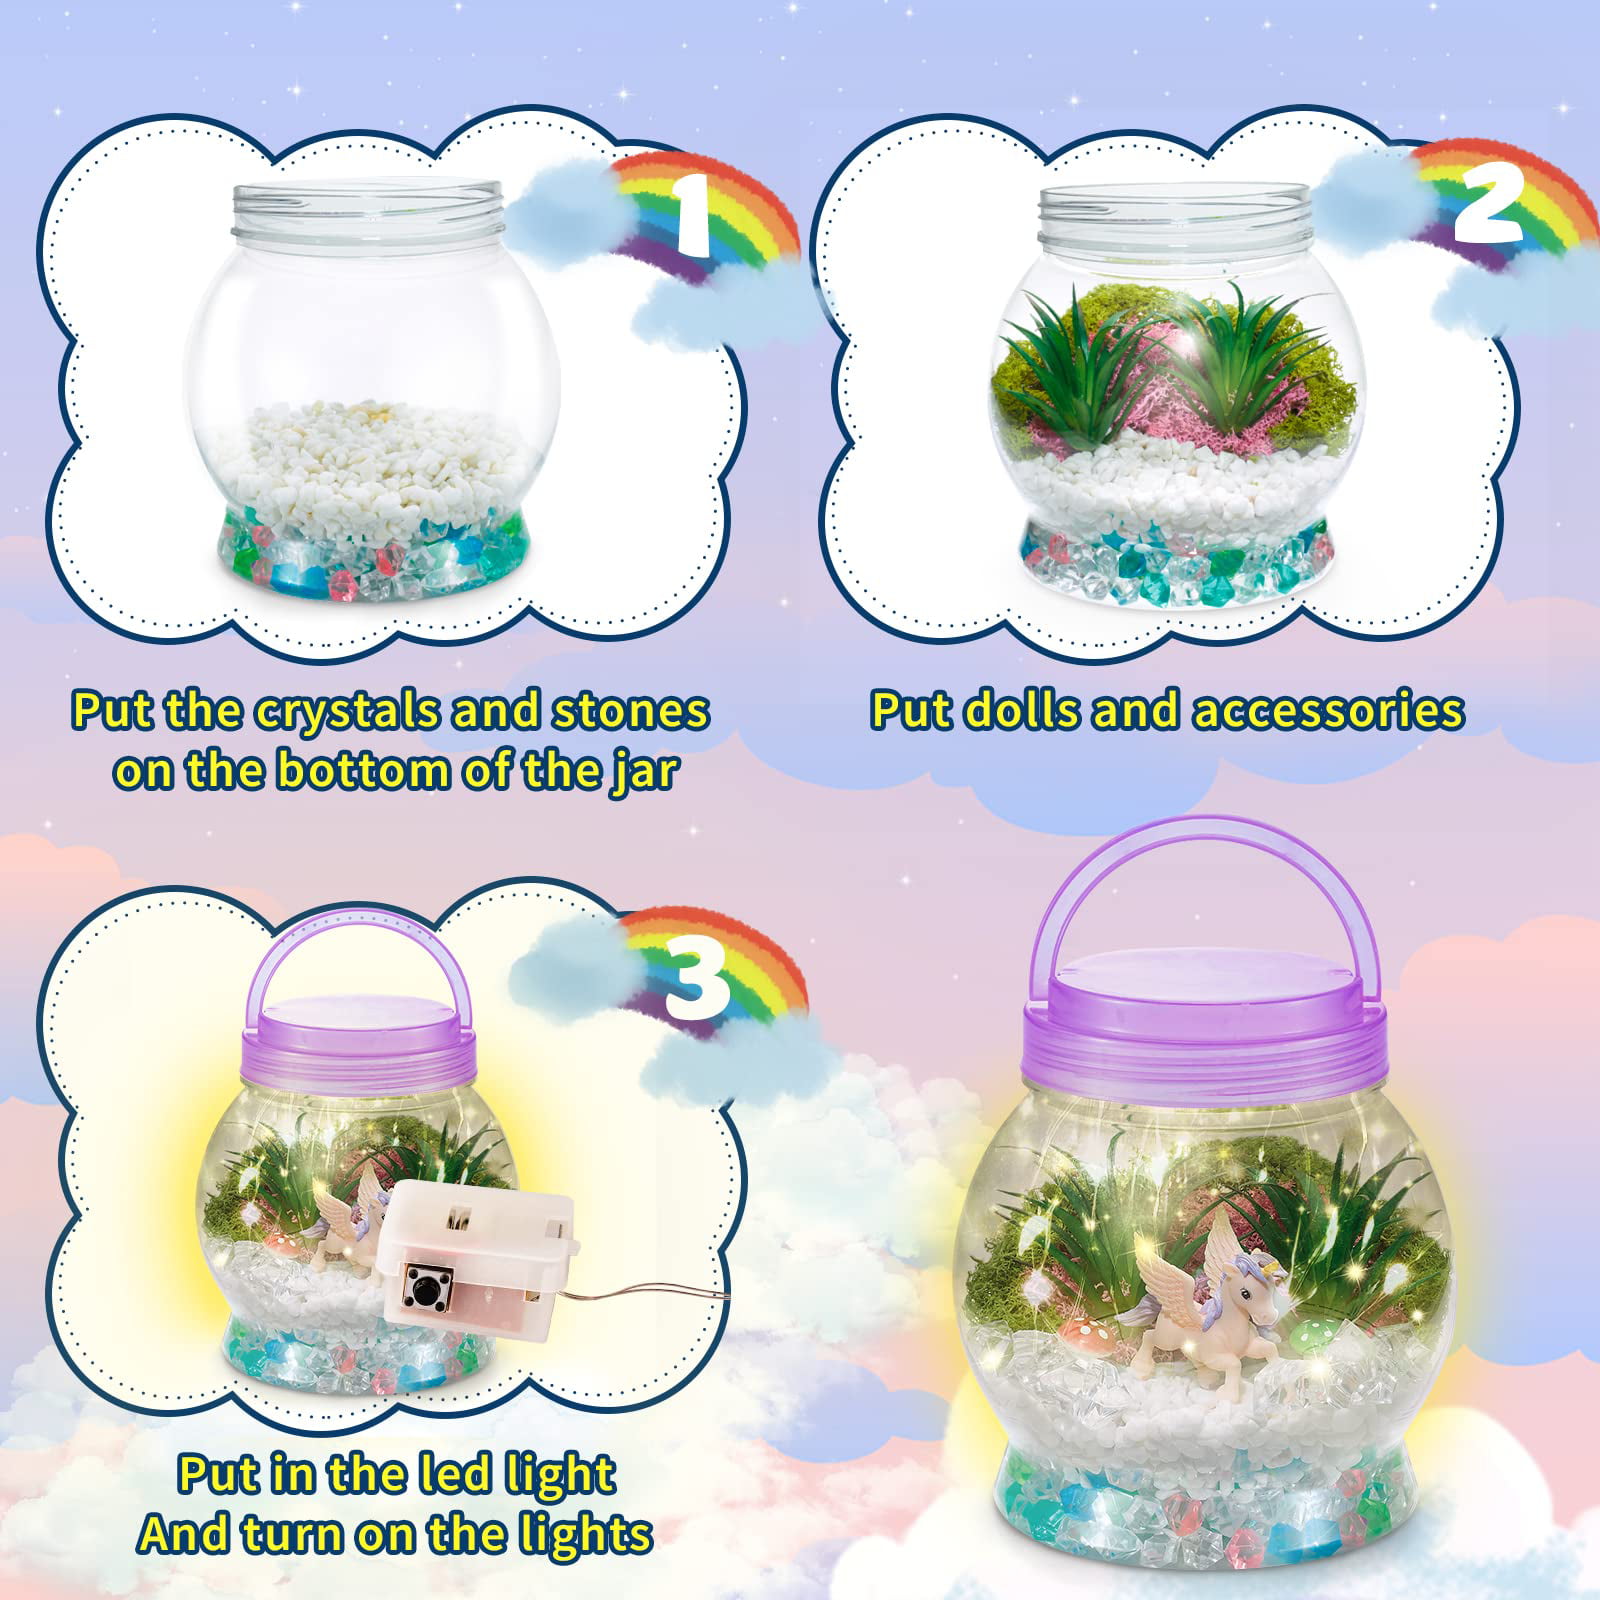 Sunnypig DIY Light-Up Kit for Kids with Mermaid Toys, Mermaid Gifts for Girls, Magical Mini Fairy Garden in A Jar with LED Light, Christmas and